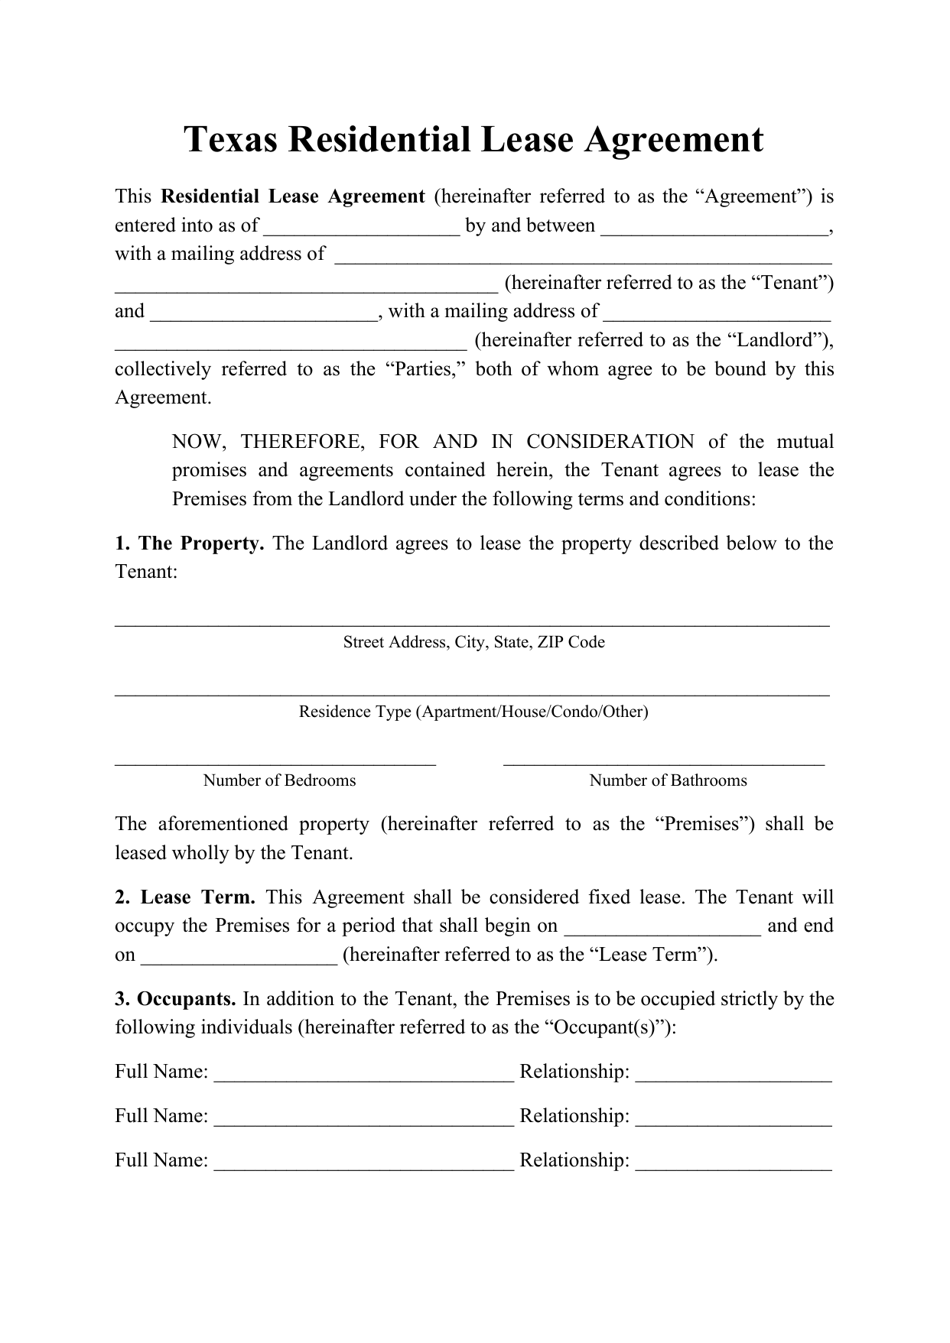 Texas Residential Lease Agreement Template Download Printable Pdf Templateroller